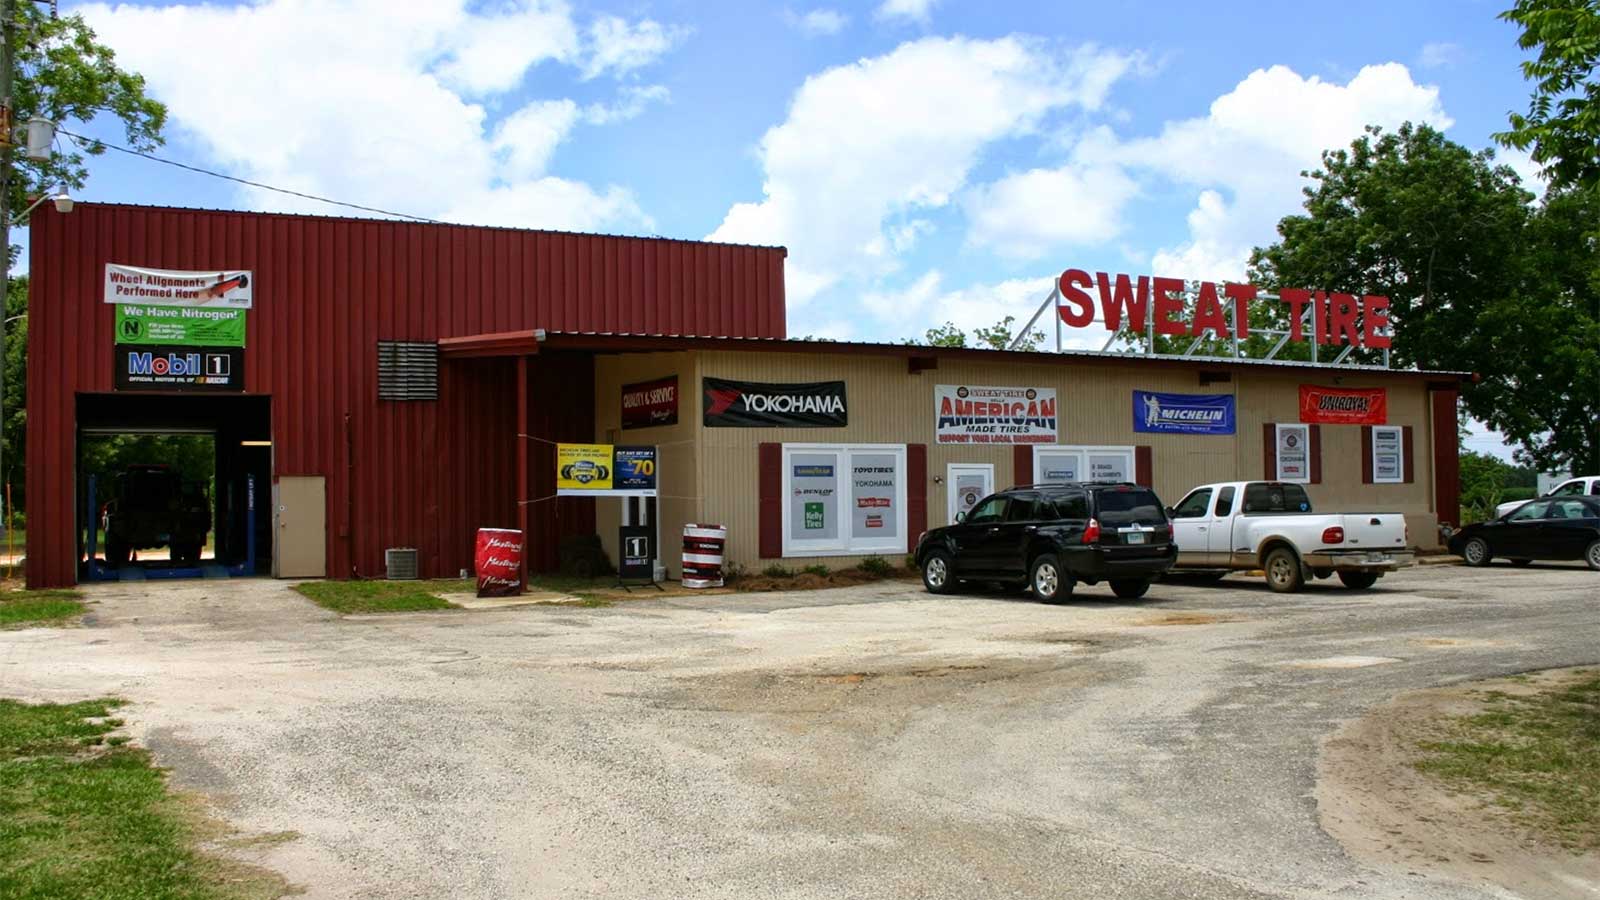 Sweat Tire Receives Carfax Top-Rated Service Designation